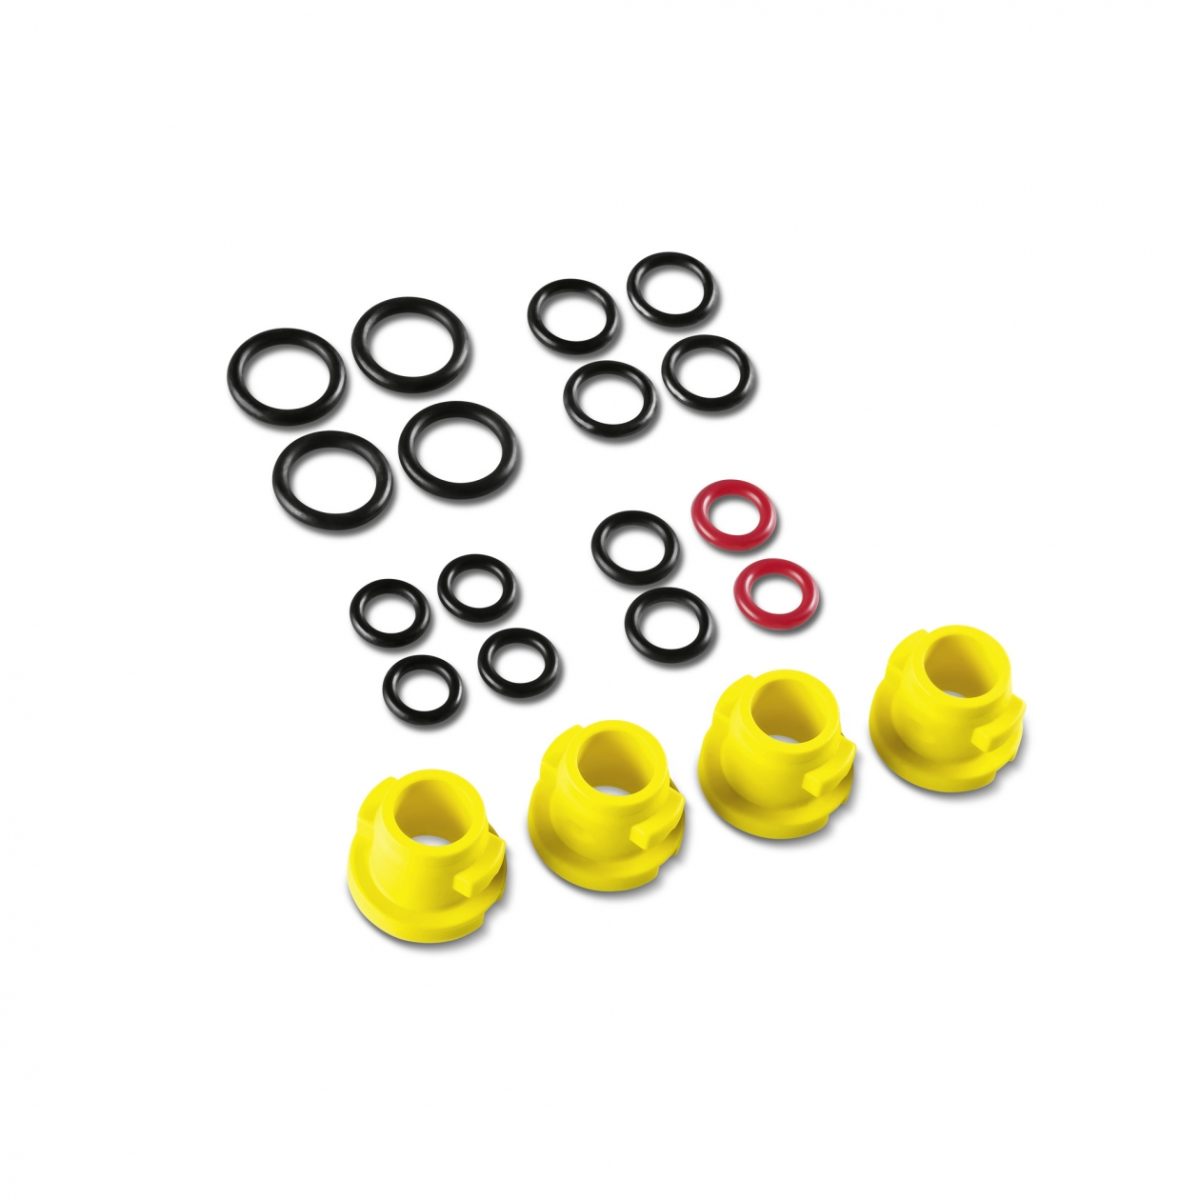 Replacement O-ring set